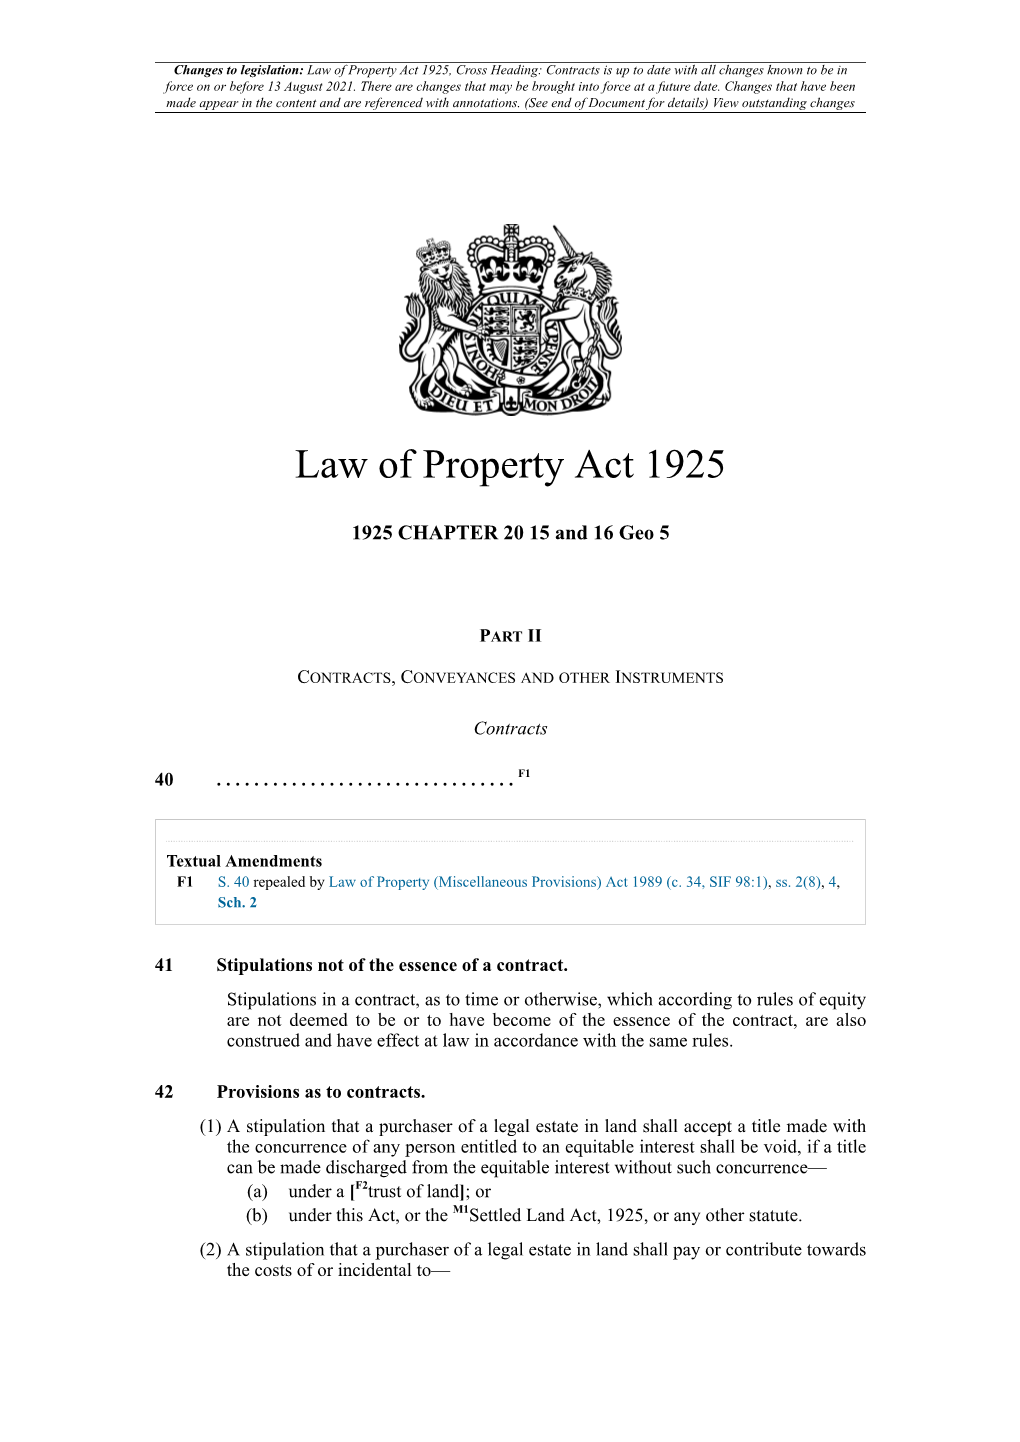 Law of Property Act 1925, Cross Heading: Contracts Is up to Date with All Changes Known to Be in Force on Or Before 13 August 2021